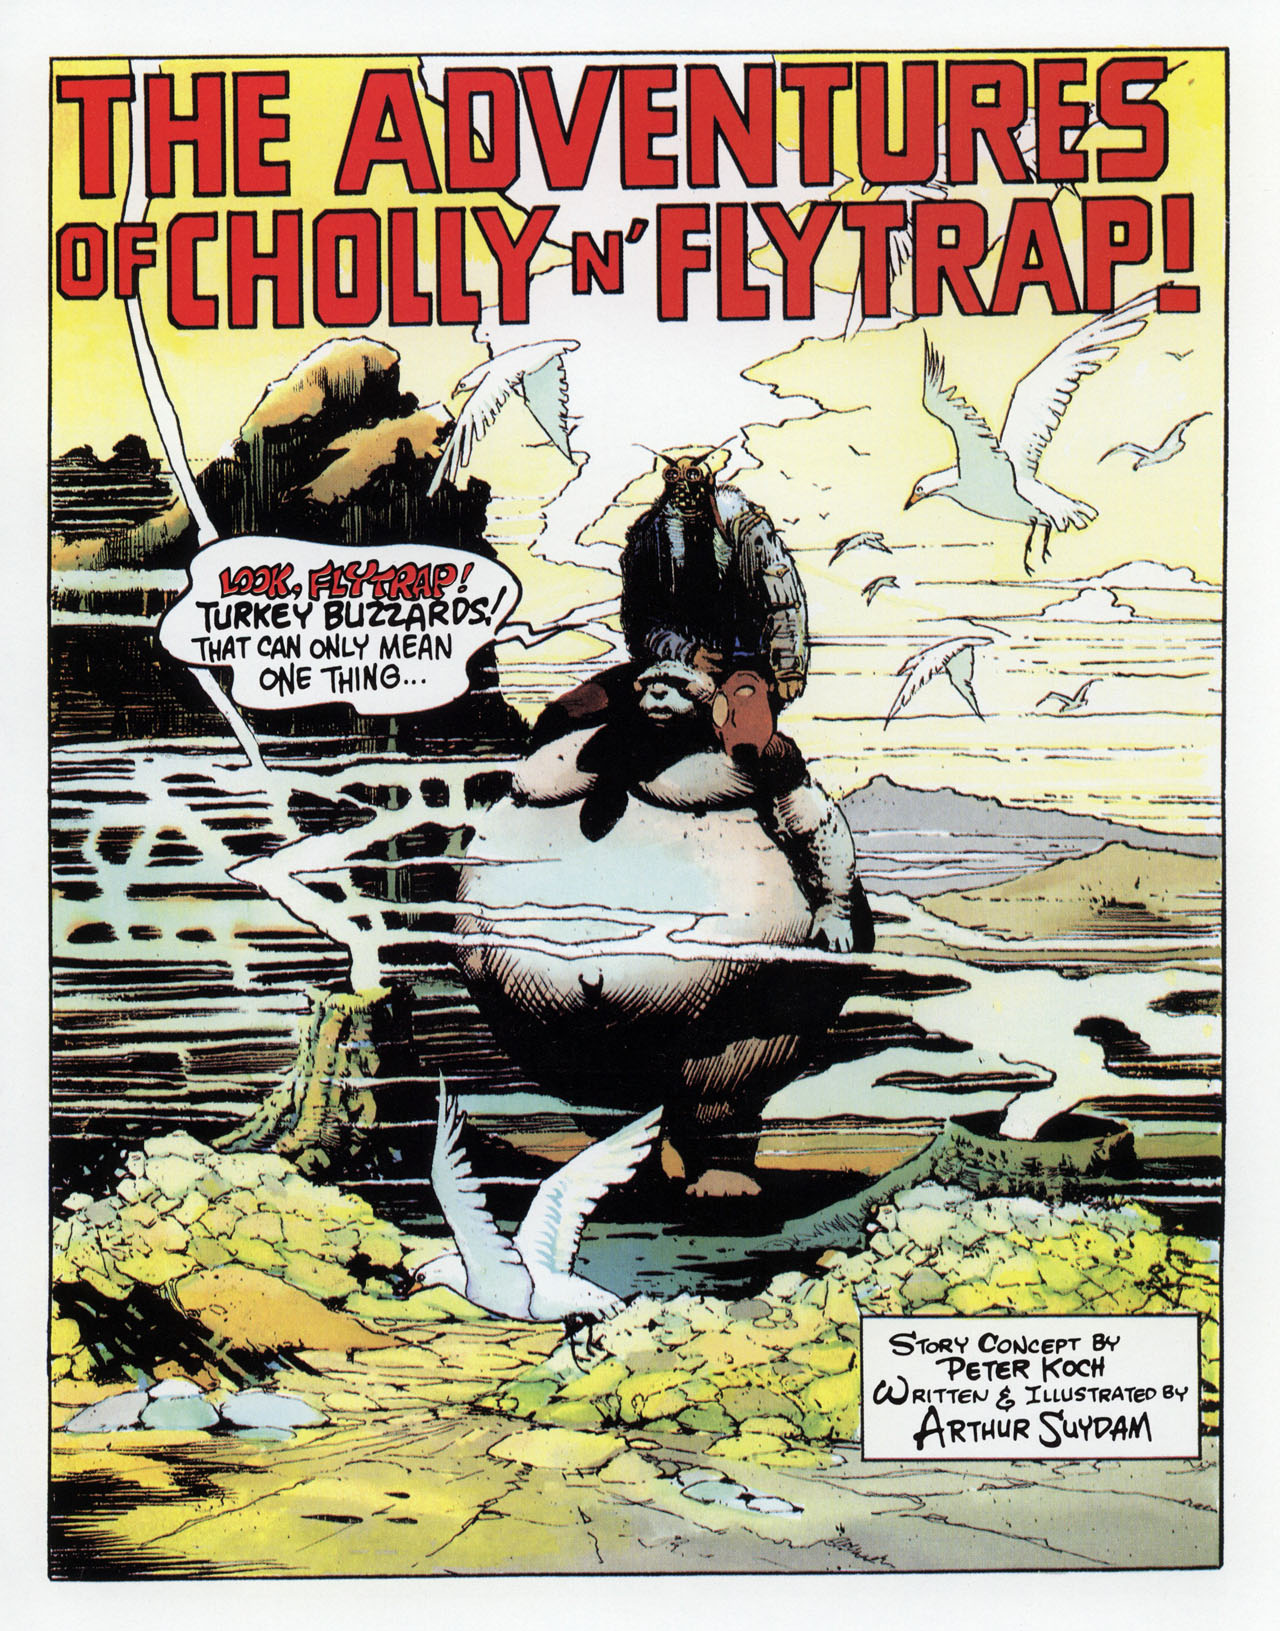 Read online The Original Adventures of Cholly and Flytrap comic -  Issue # Full - 49